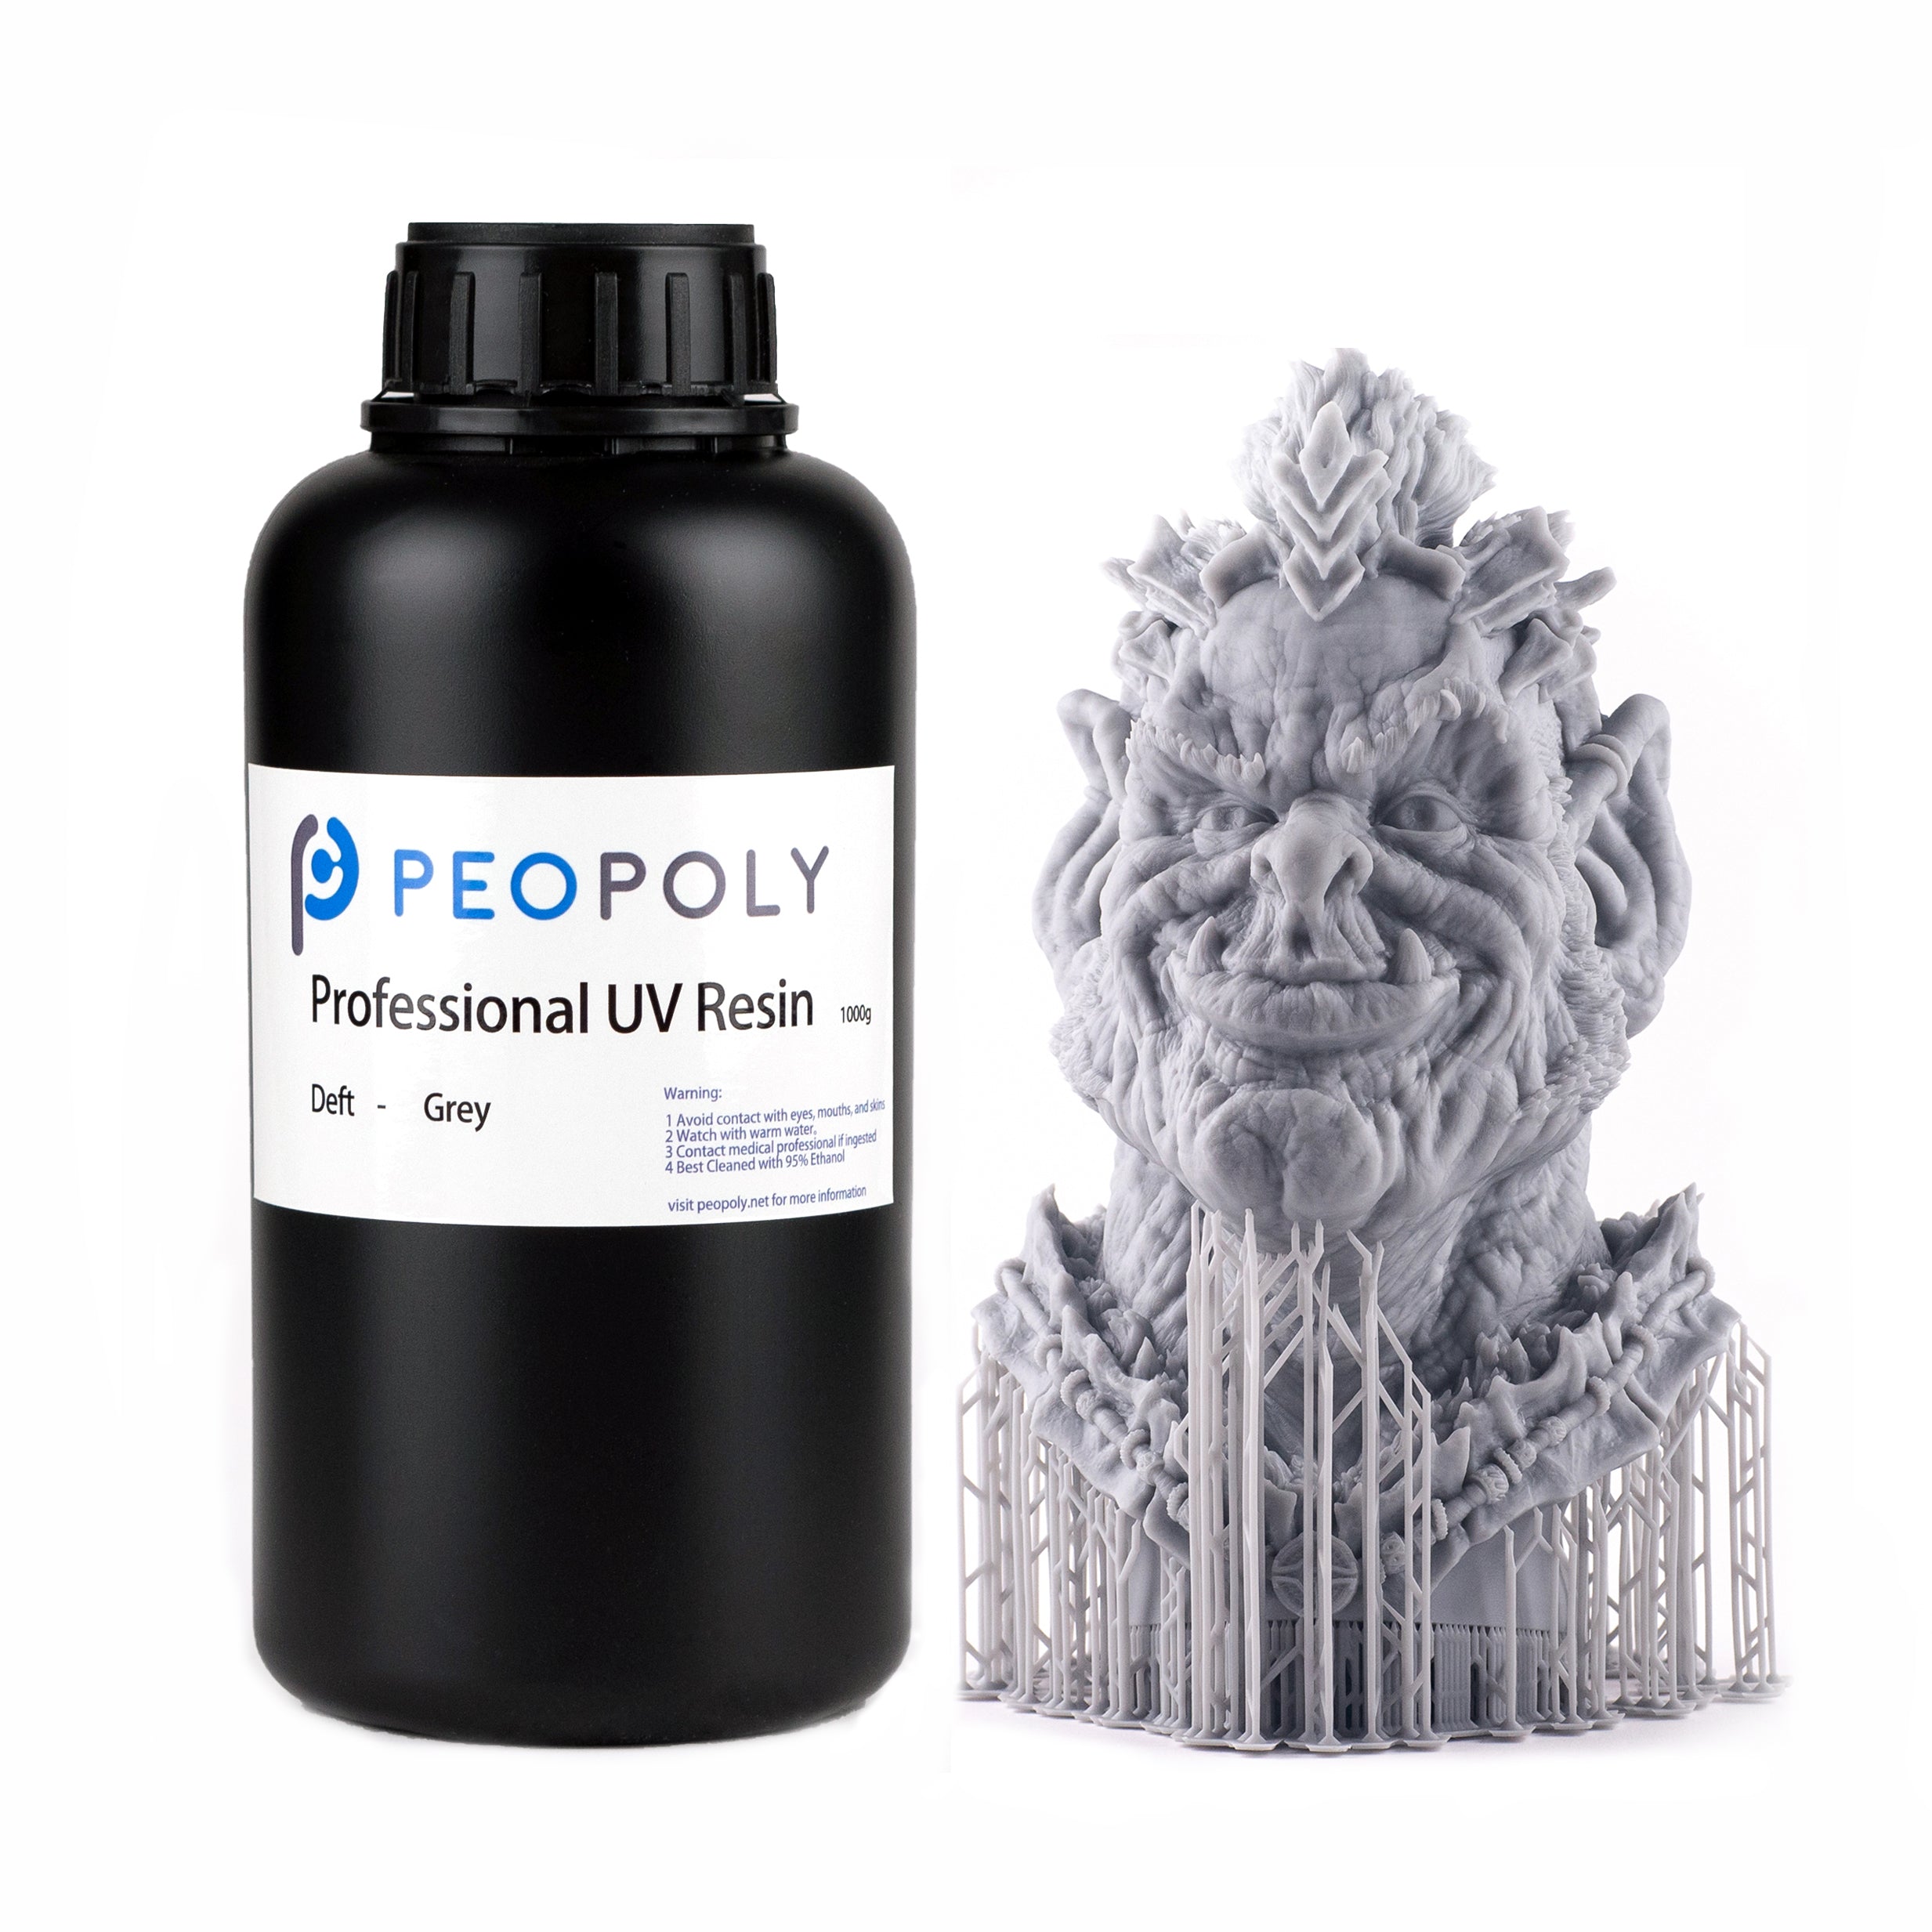 Peopoly Deft Resin (1kg) - Perfect for Large-Volume Resin Printers